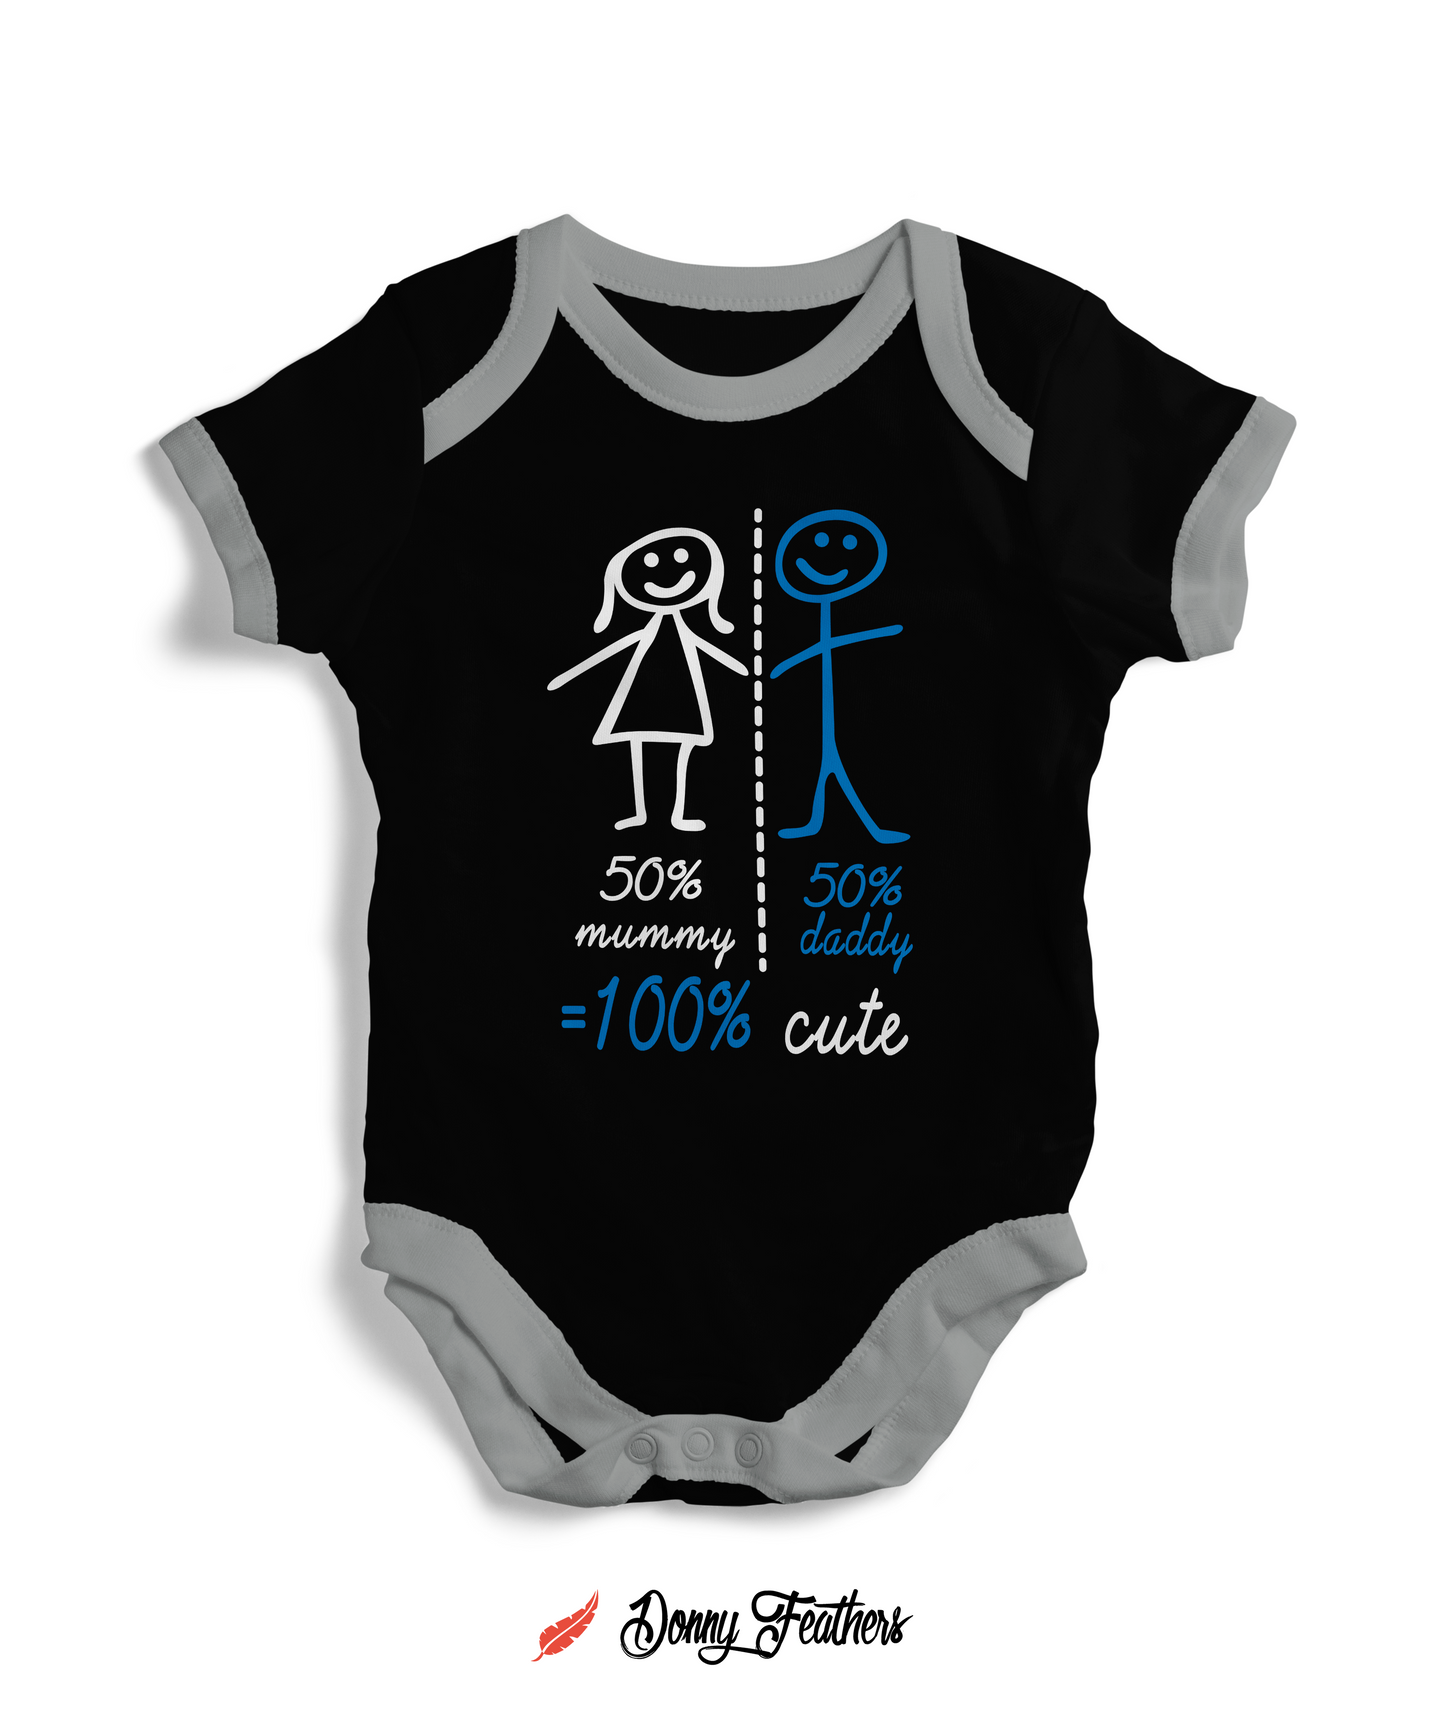 Baby Rompers | Mummy Daddy Baby Romper (Black) By: Donny Feathers